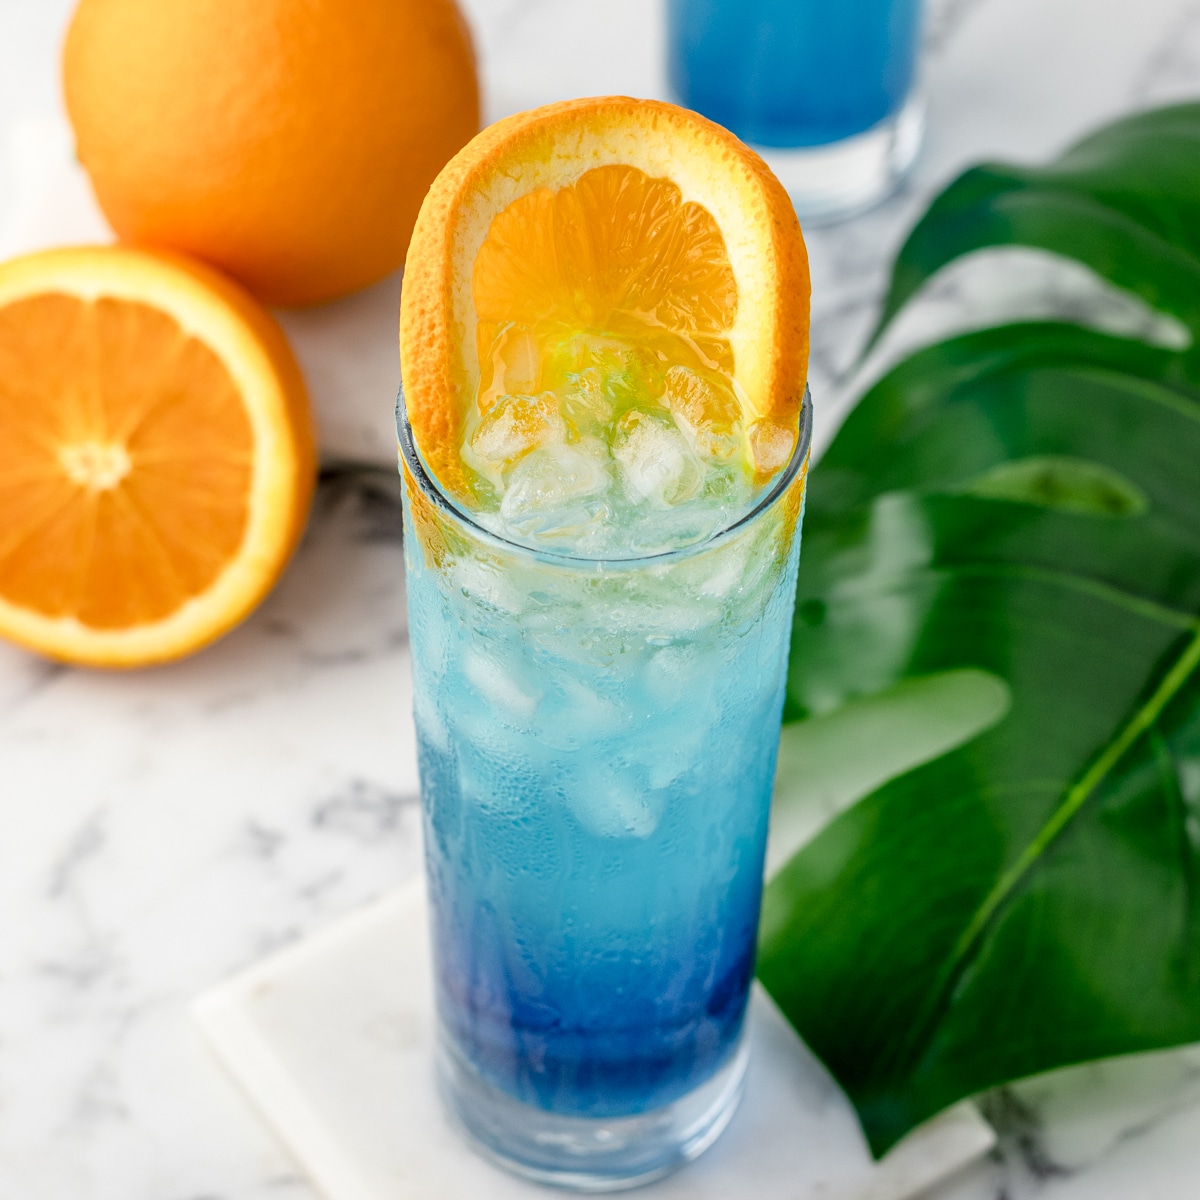 This Blue Lagoon Mocktail is citrusy, refreshing, and beautifully blue. It takes 5 minutes, requires only 3 ingredient, and has no alcohol.